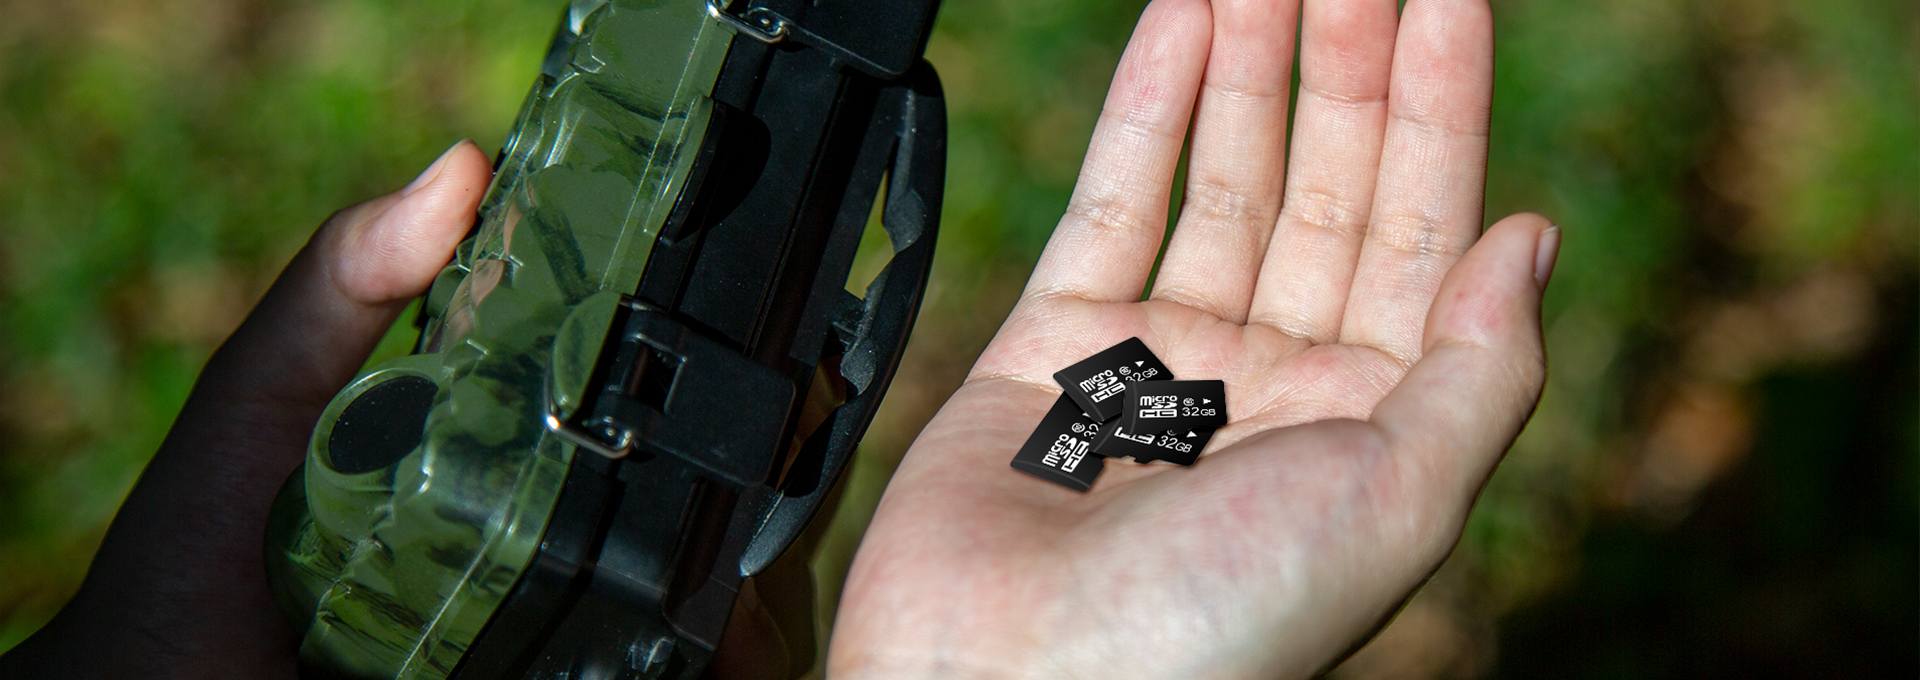 Coolife trail camera SD card